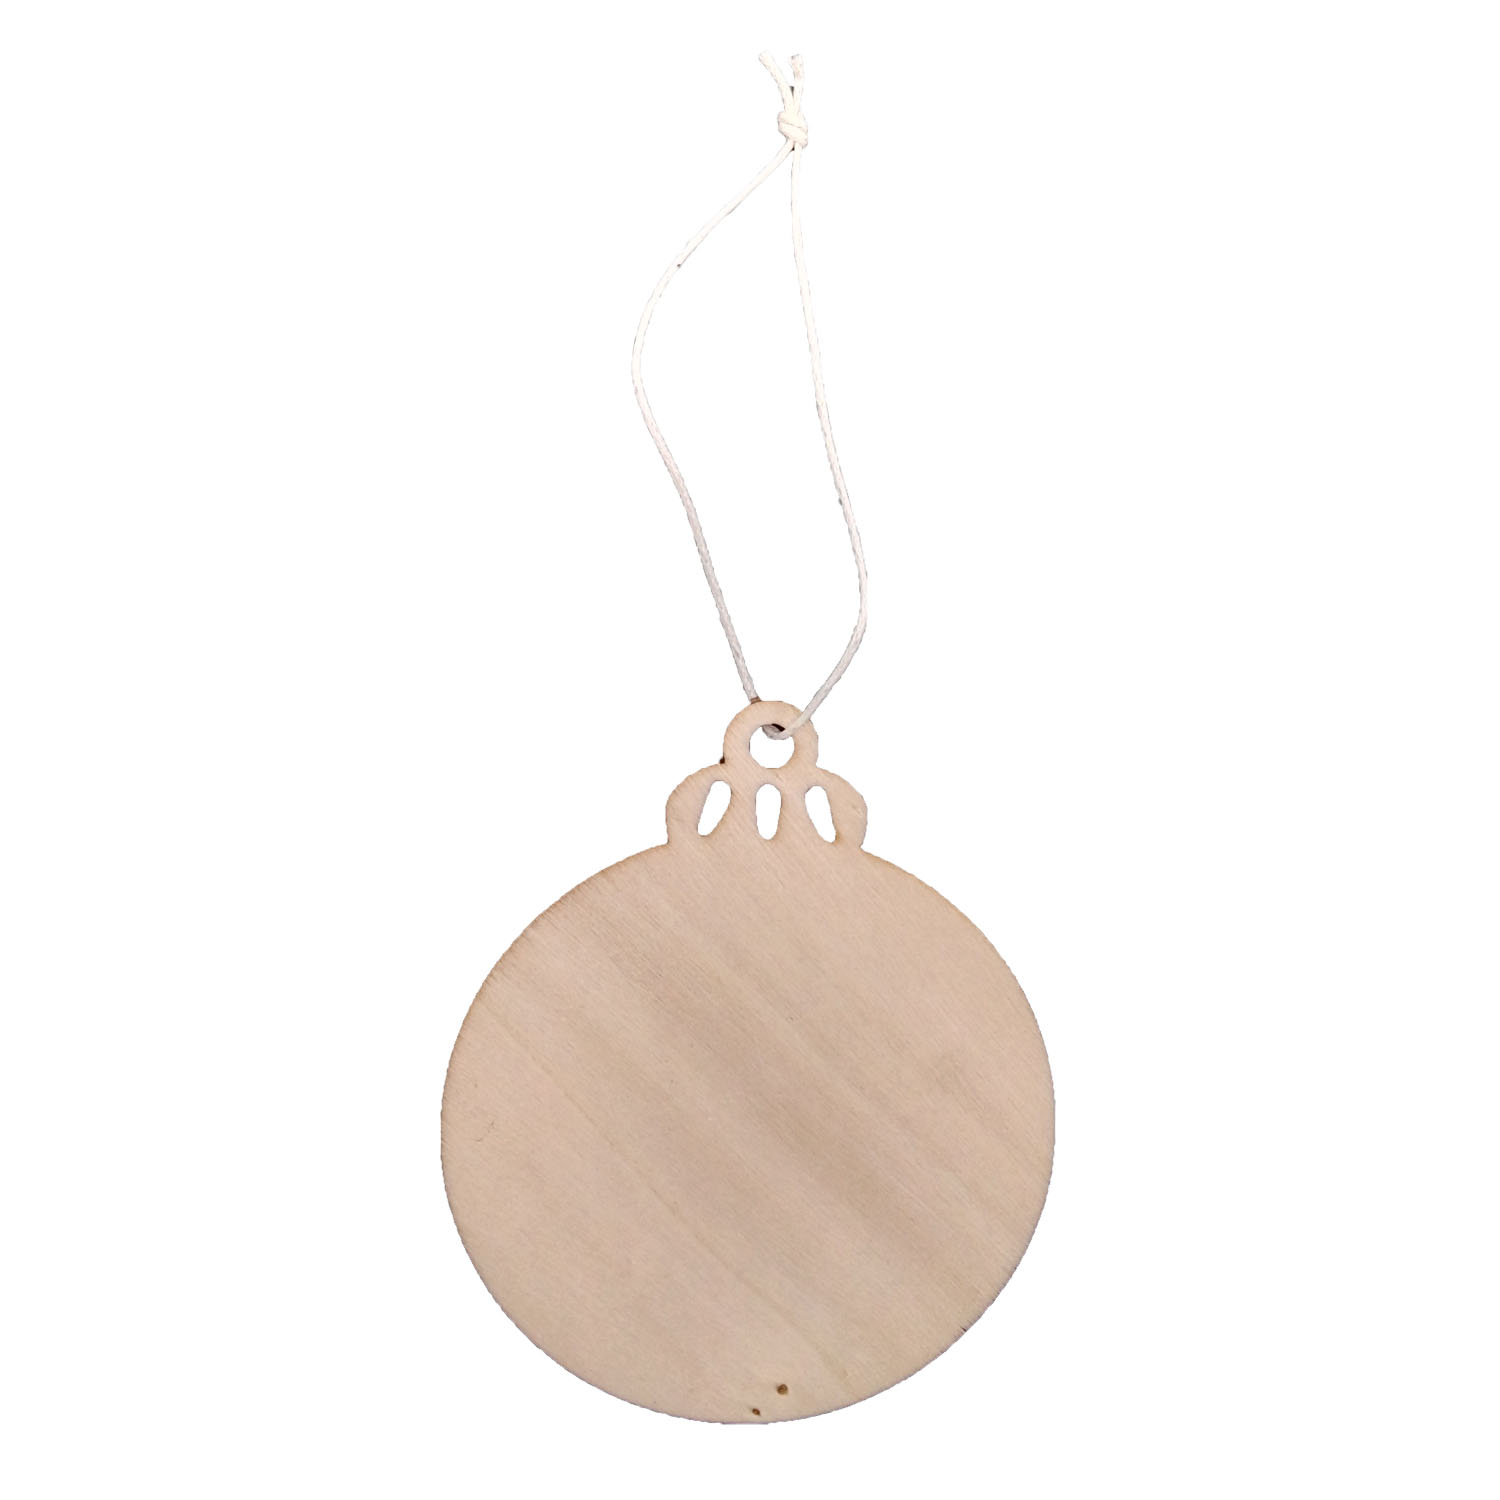 GL-AAA1251 Hanging Wooden Ball for Decoration